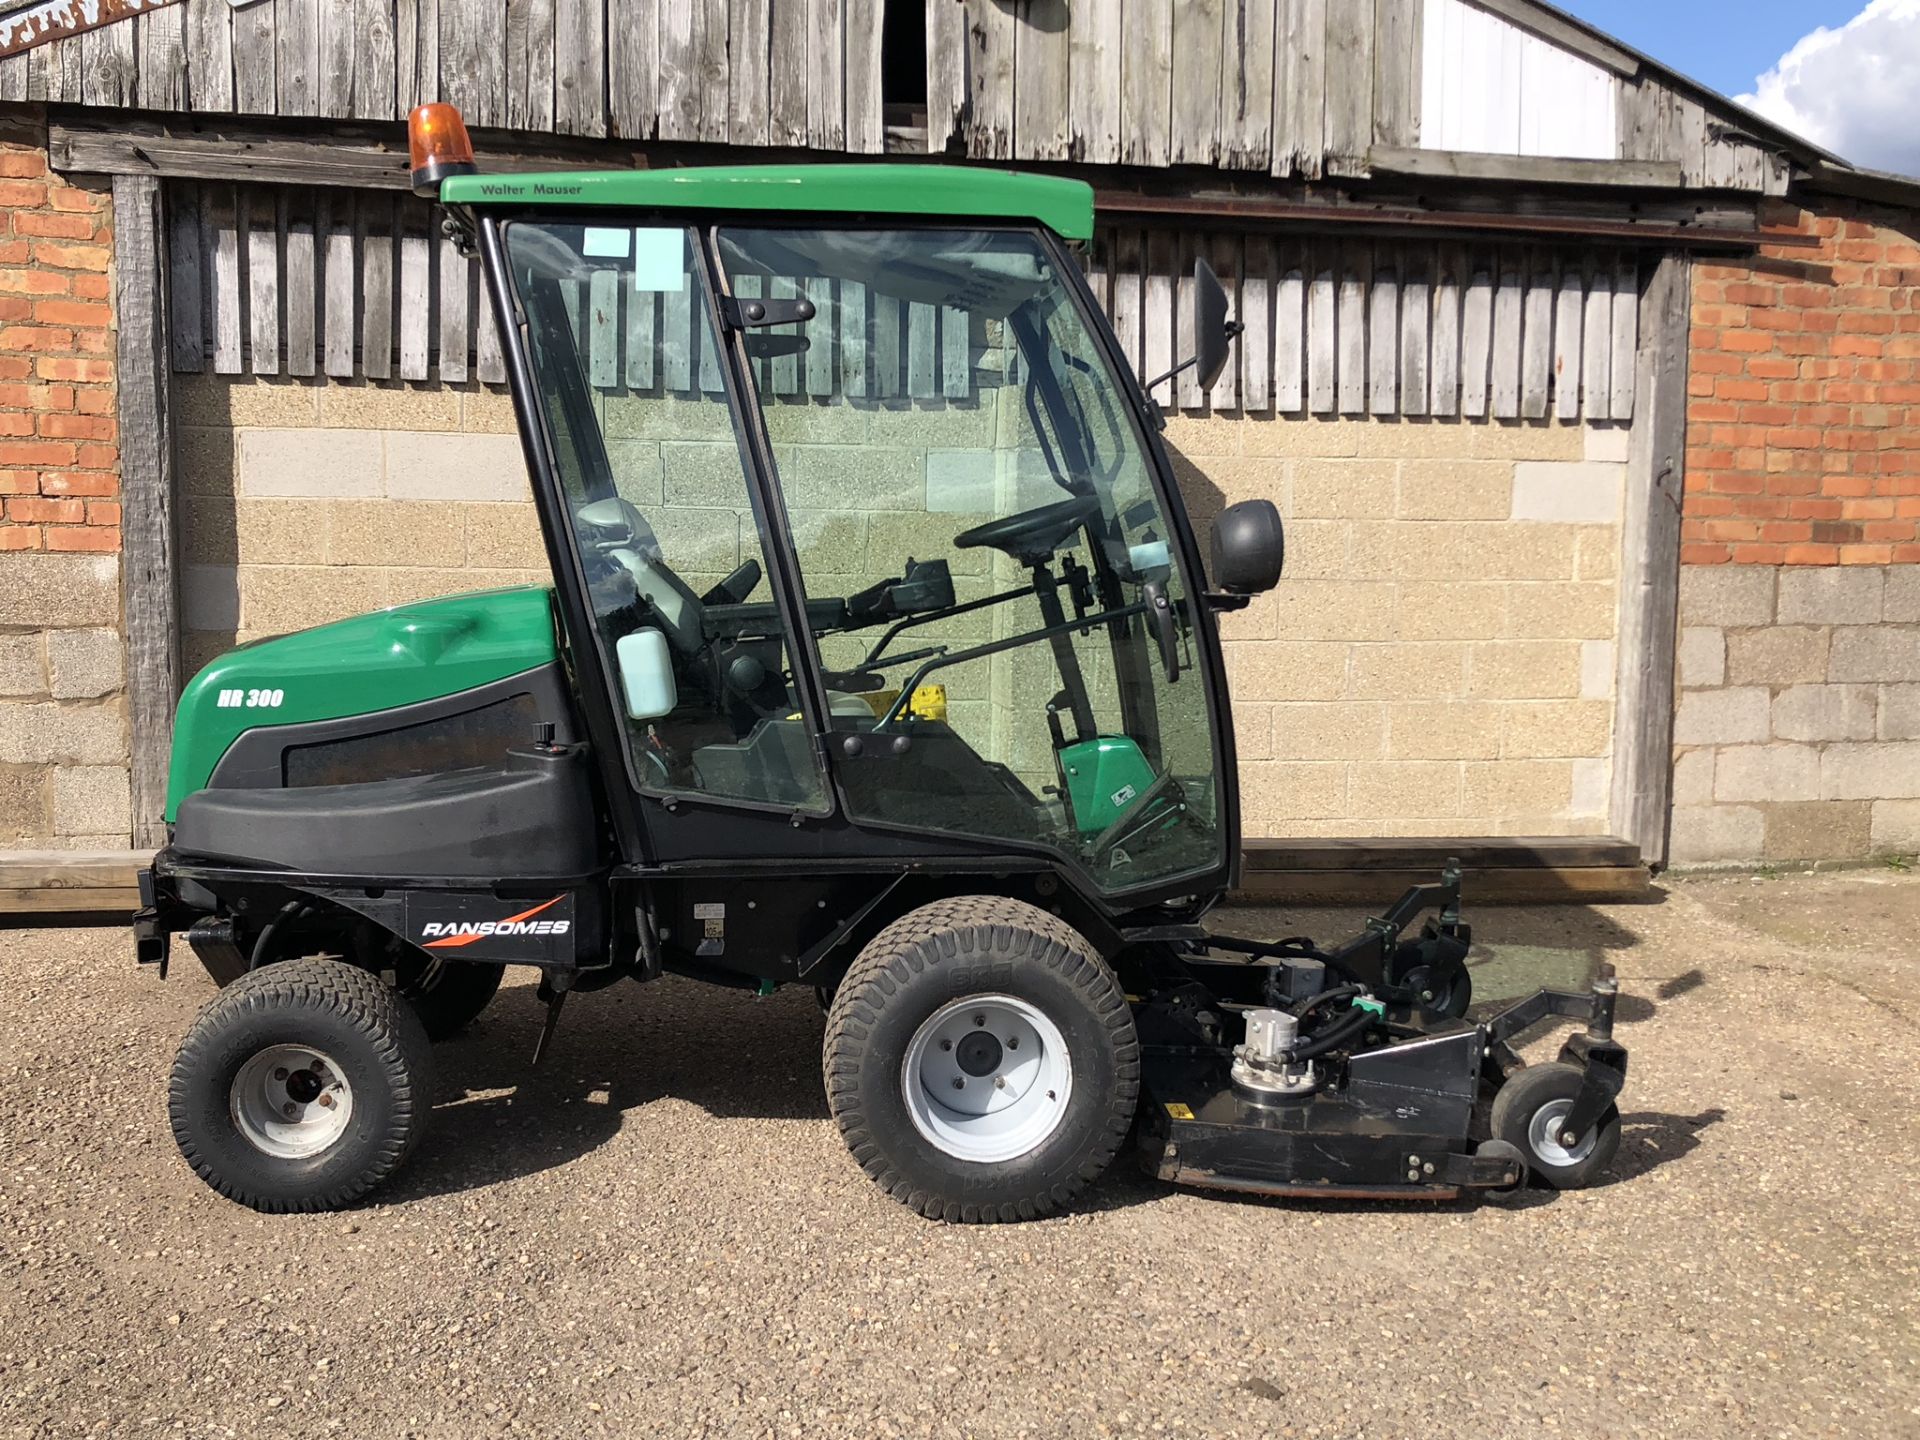 RANSOMES HR3300T UPFRONT ROTARY MOWER 1 OWNER FROM NEW *PLUS VAT*